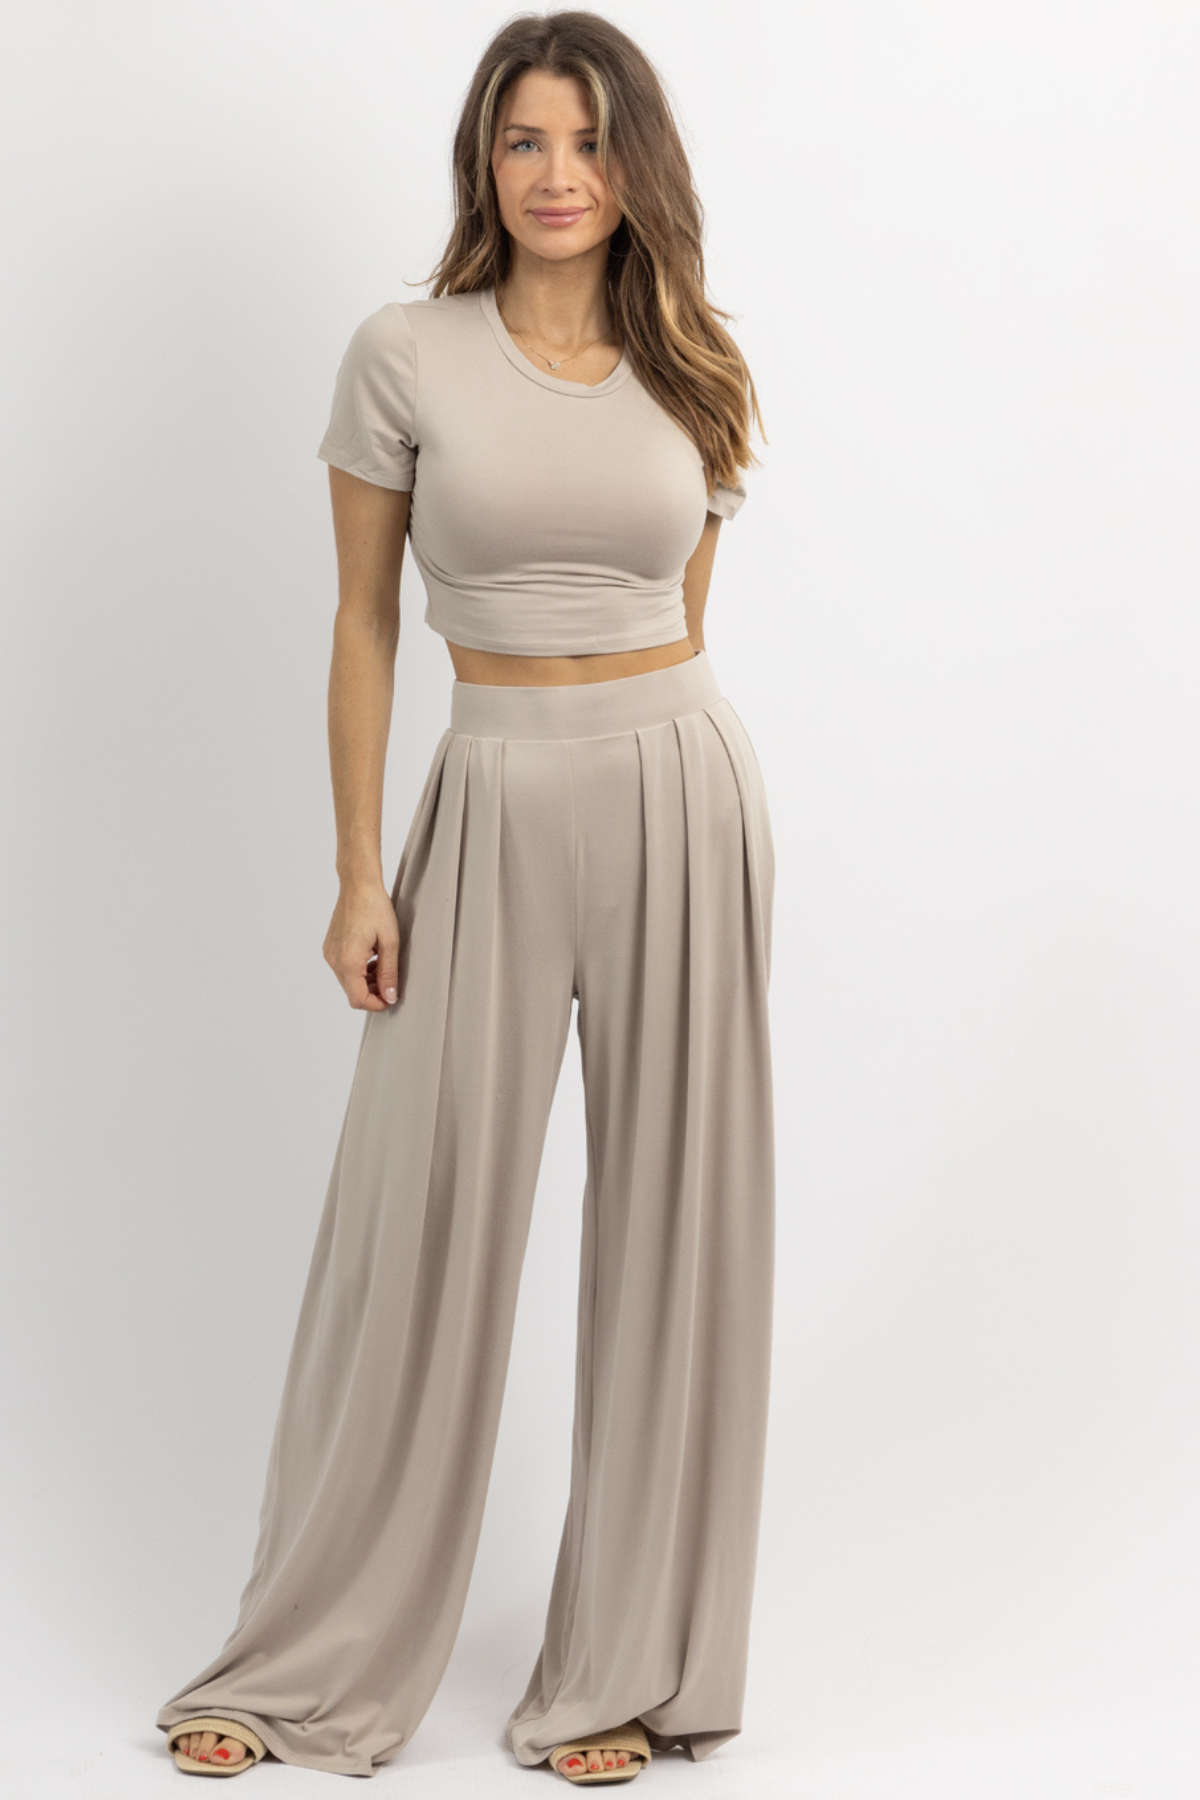 BUTTER SOFT OATMEAL CROP PALAZZO PANT SET *BACK IN STOCK* – L'ABEYE